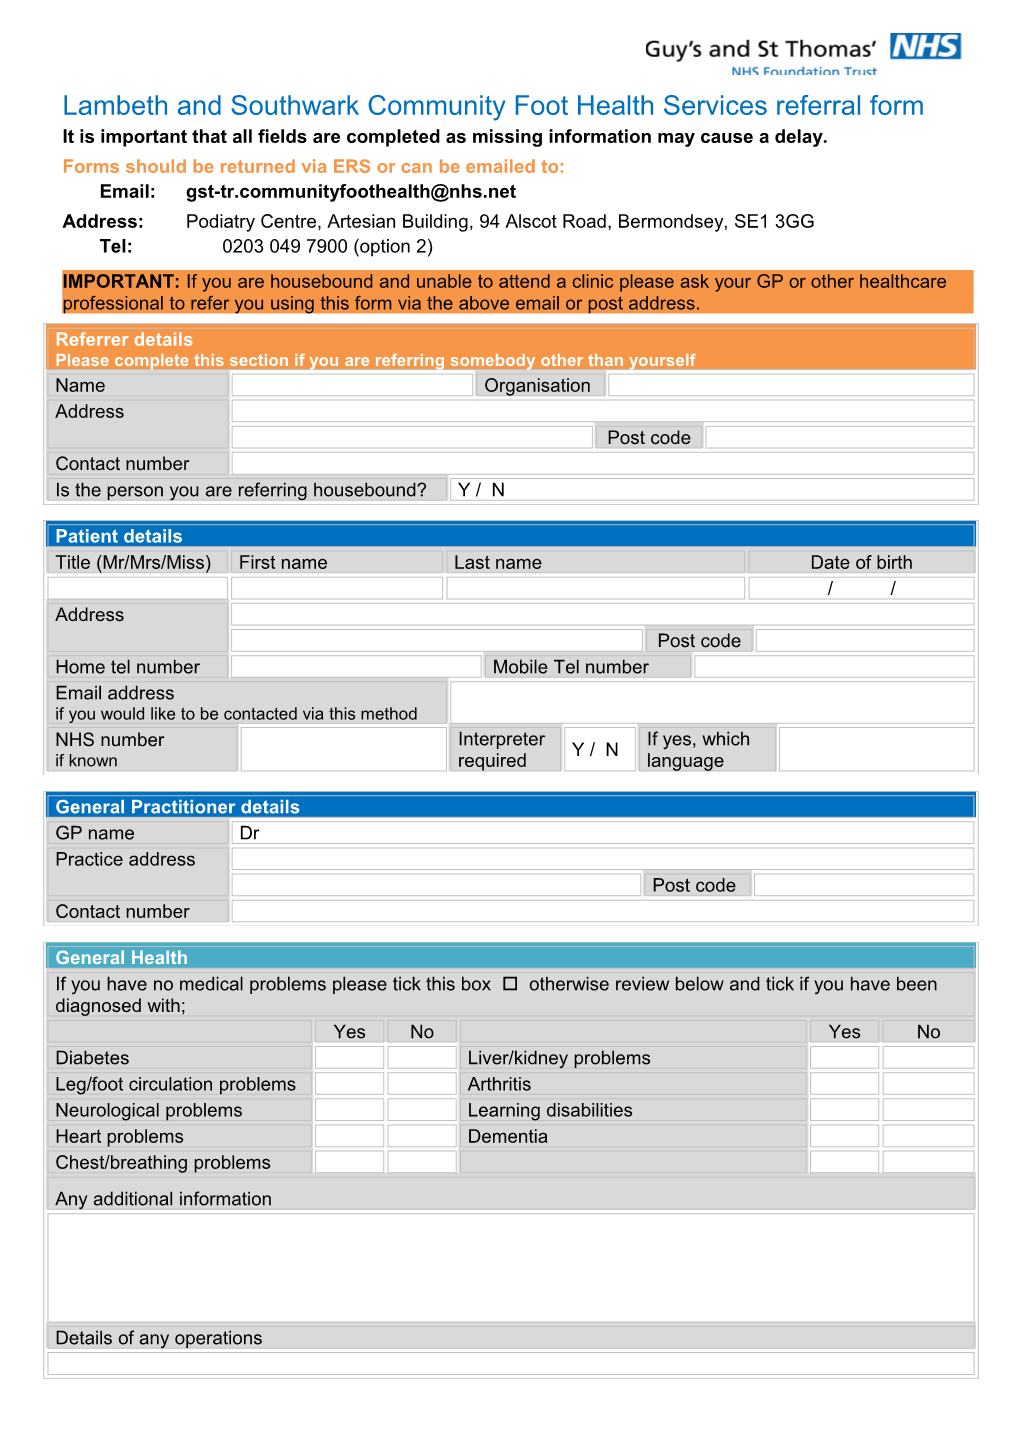 Lambeth and Southwark Community Foot Health Services Referral Form